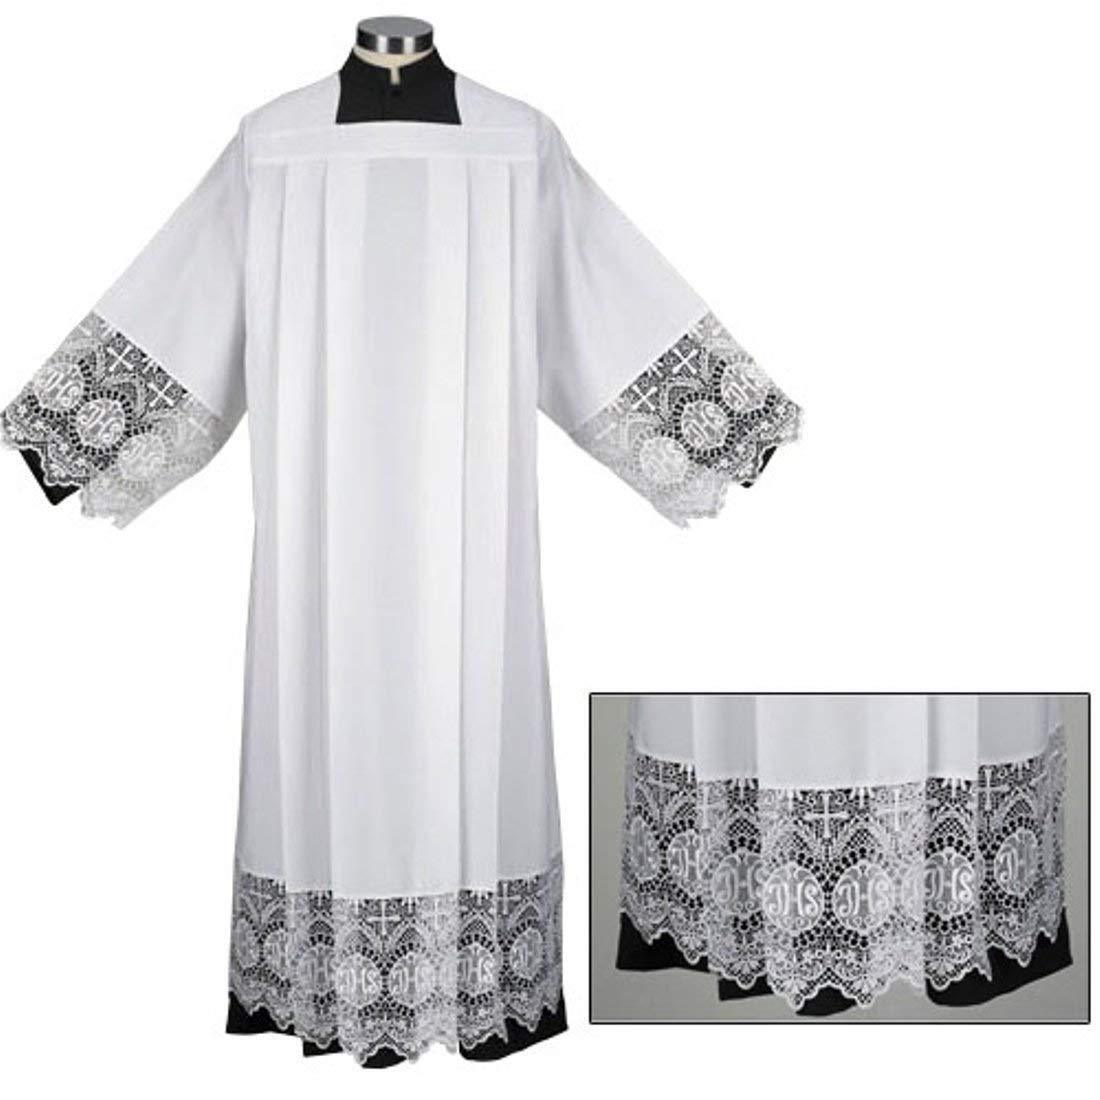 Liturgical Church Garment Polyester and IHS Lace Box Pleated Alb, Large